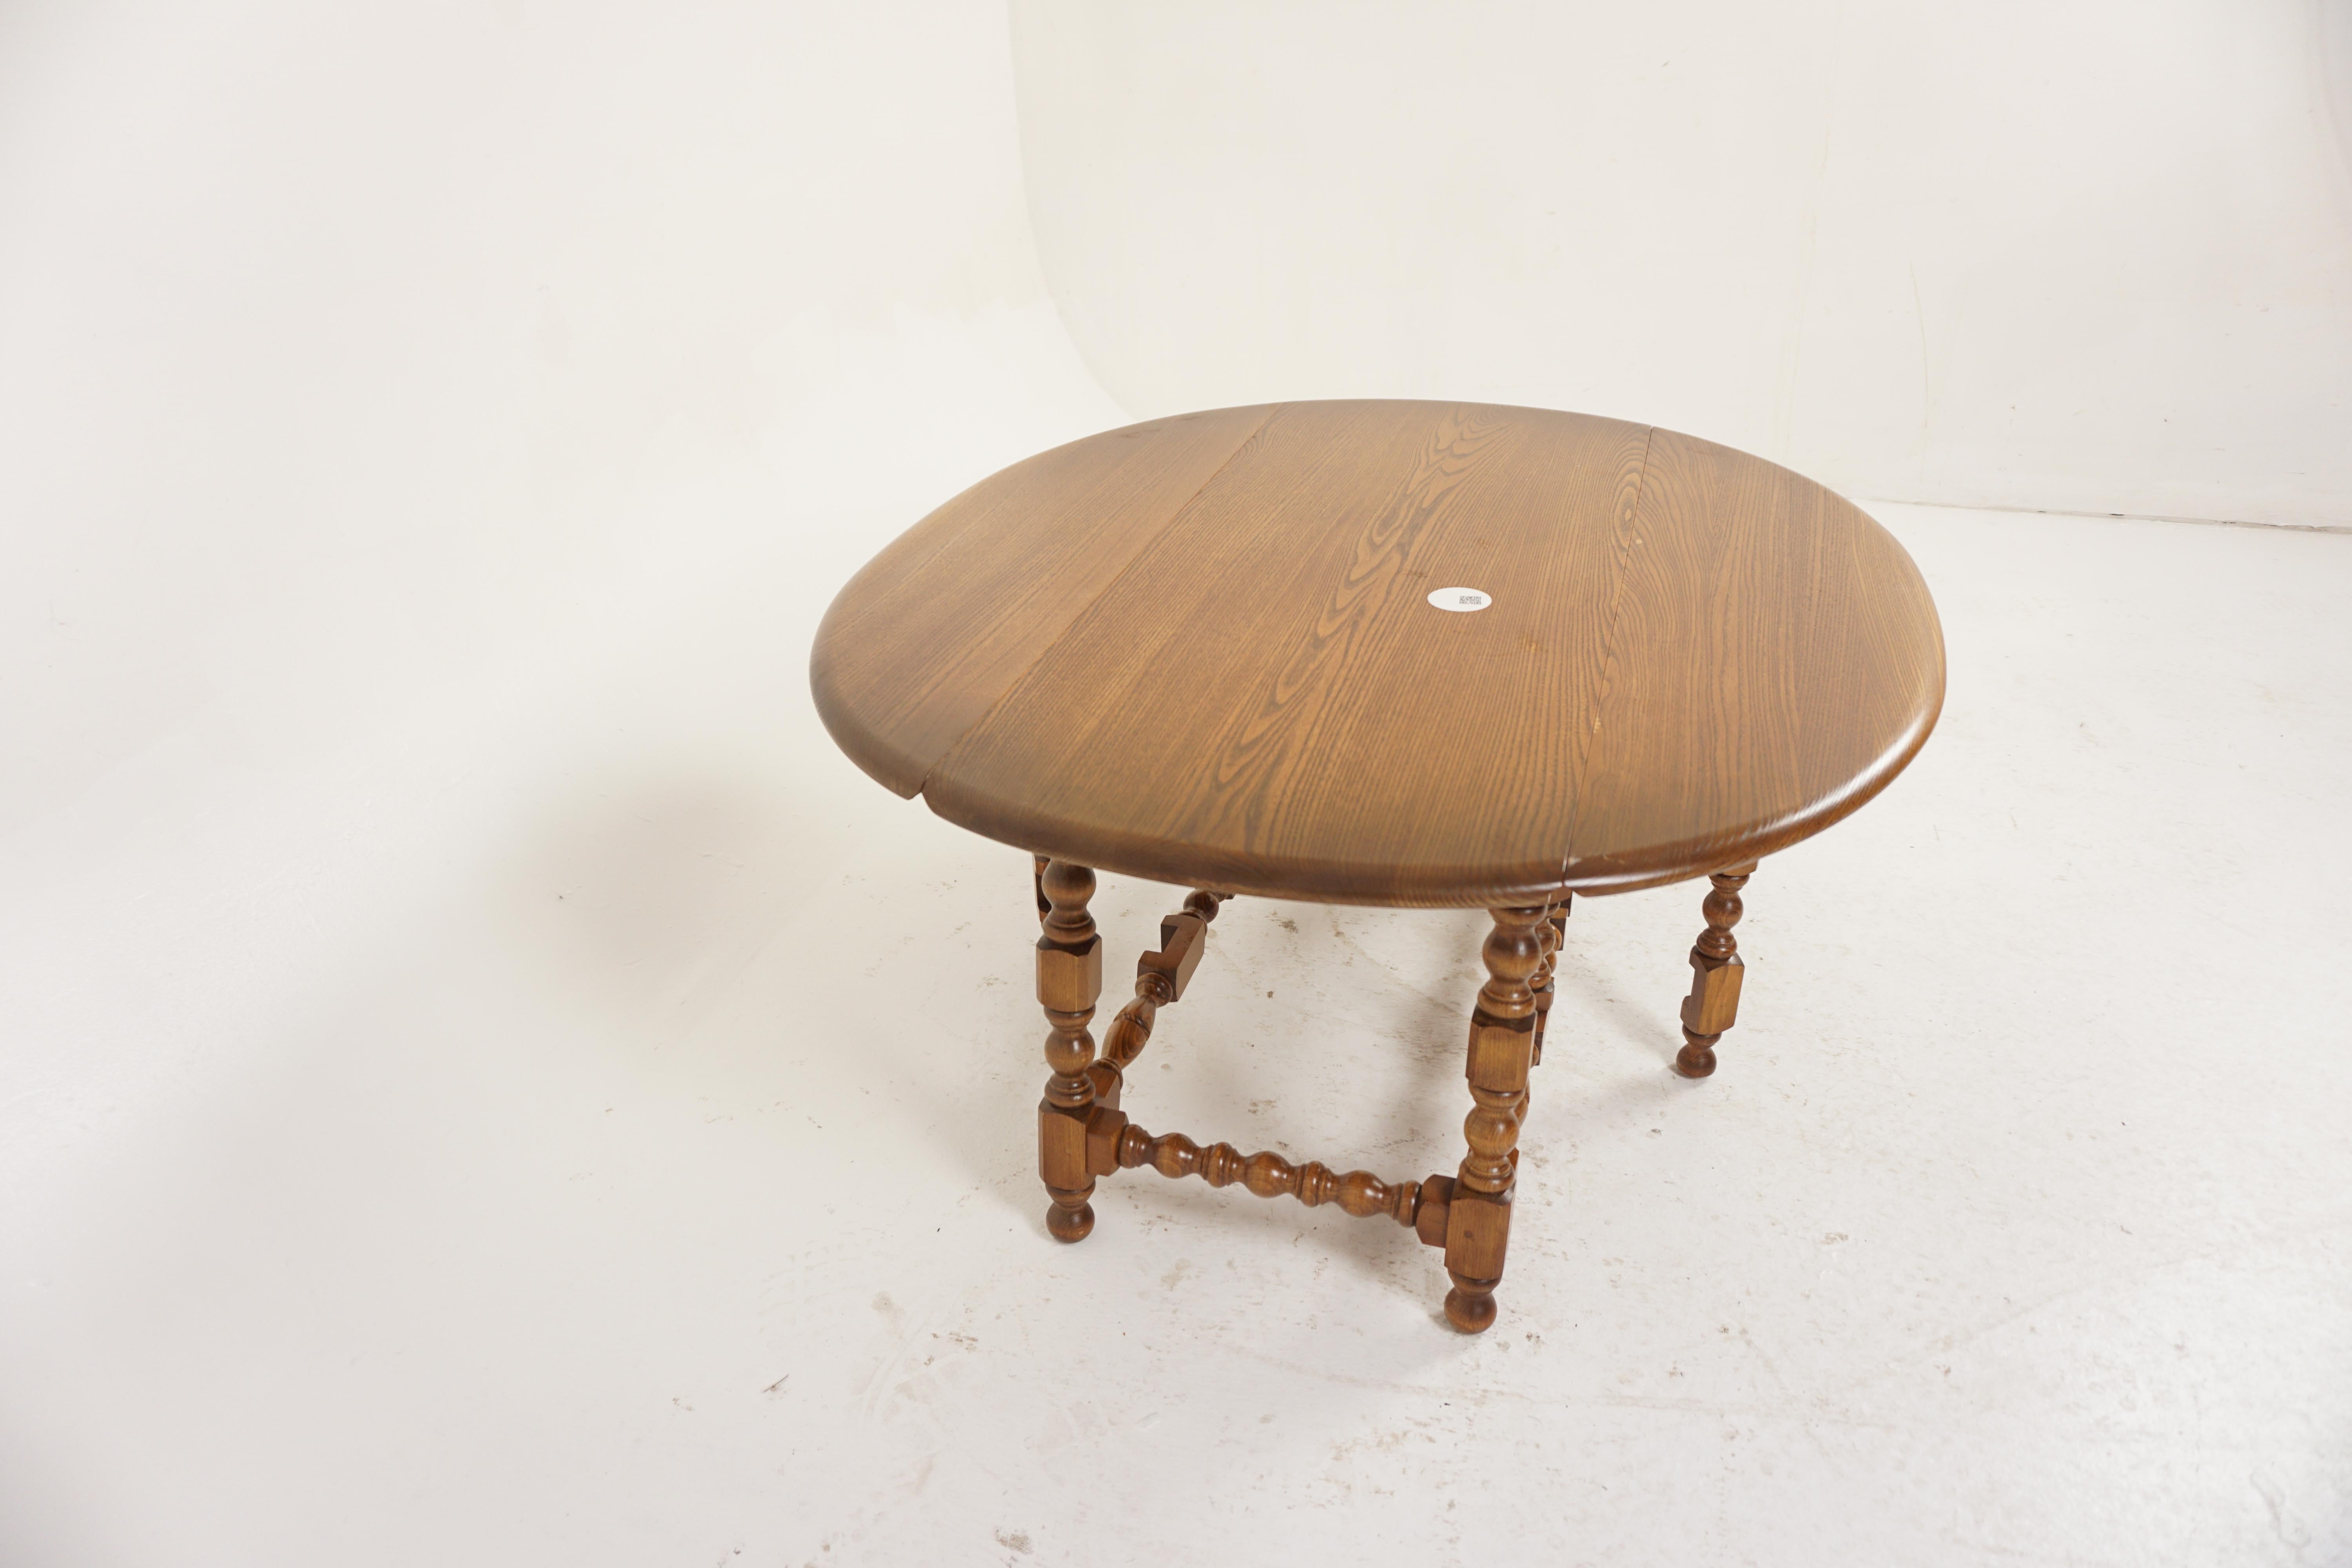 Vintage Ash Coffee Table, Drop Leaf, Gateleg, Scotland 1930, H1106 In Good Condition For Sale In Vancouver, BC